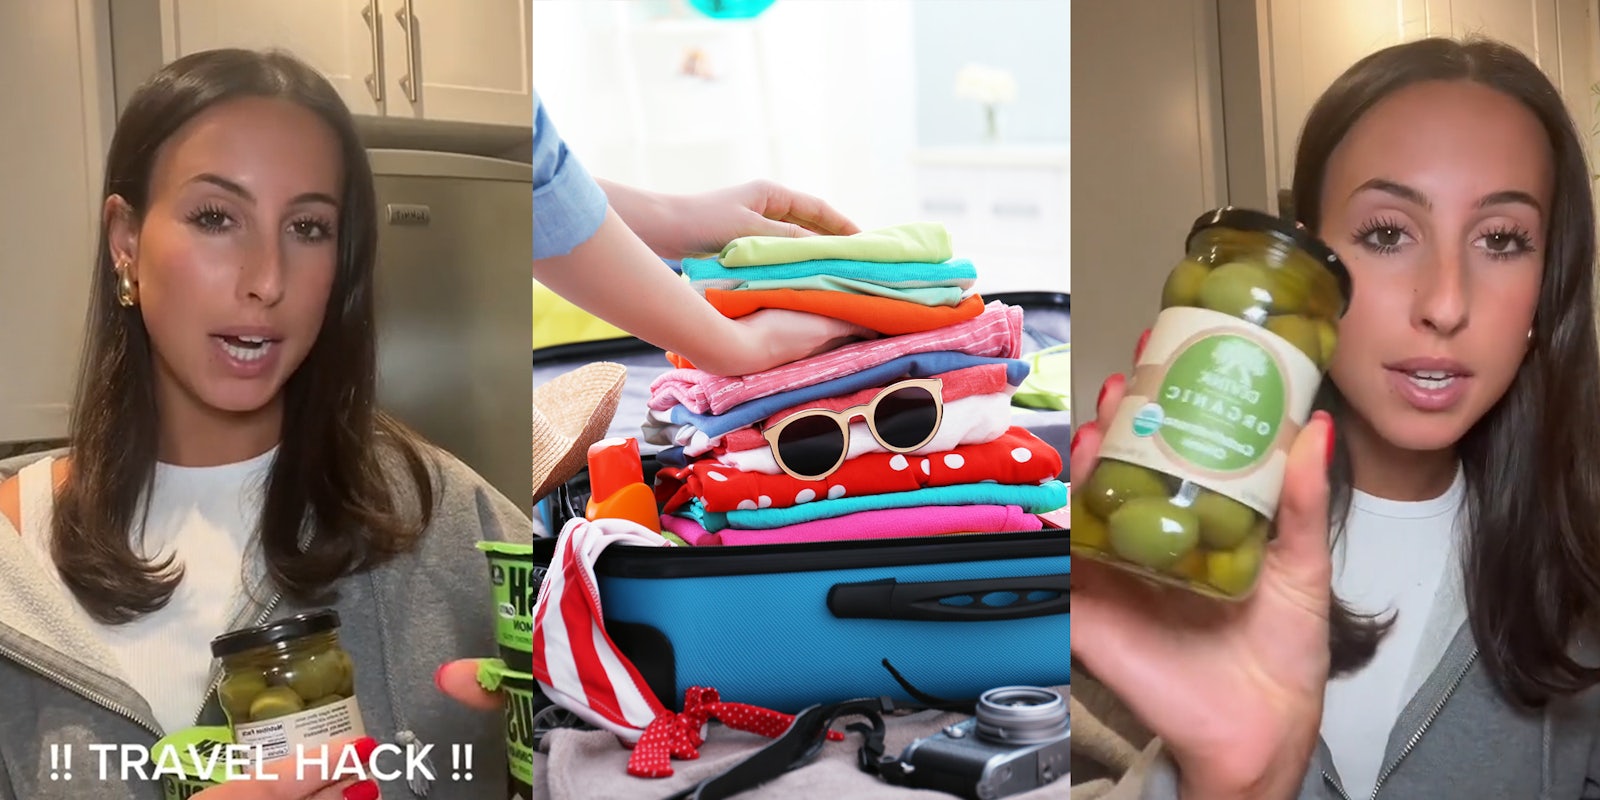 person speaking in kitchen with jar of olives in hand with caption '!!TRAVEL HACK!!' (l) person packing luggage (c) person speaking in kitchen with jar of olives in hand (r)